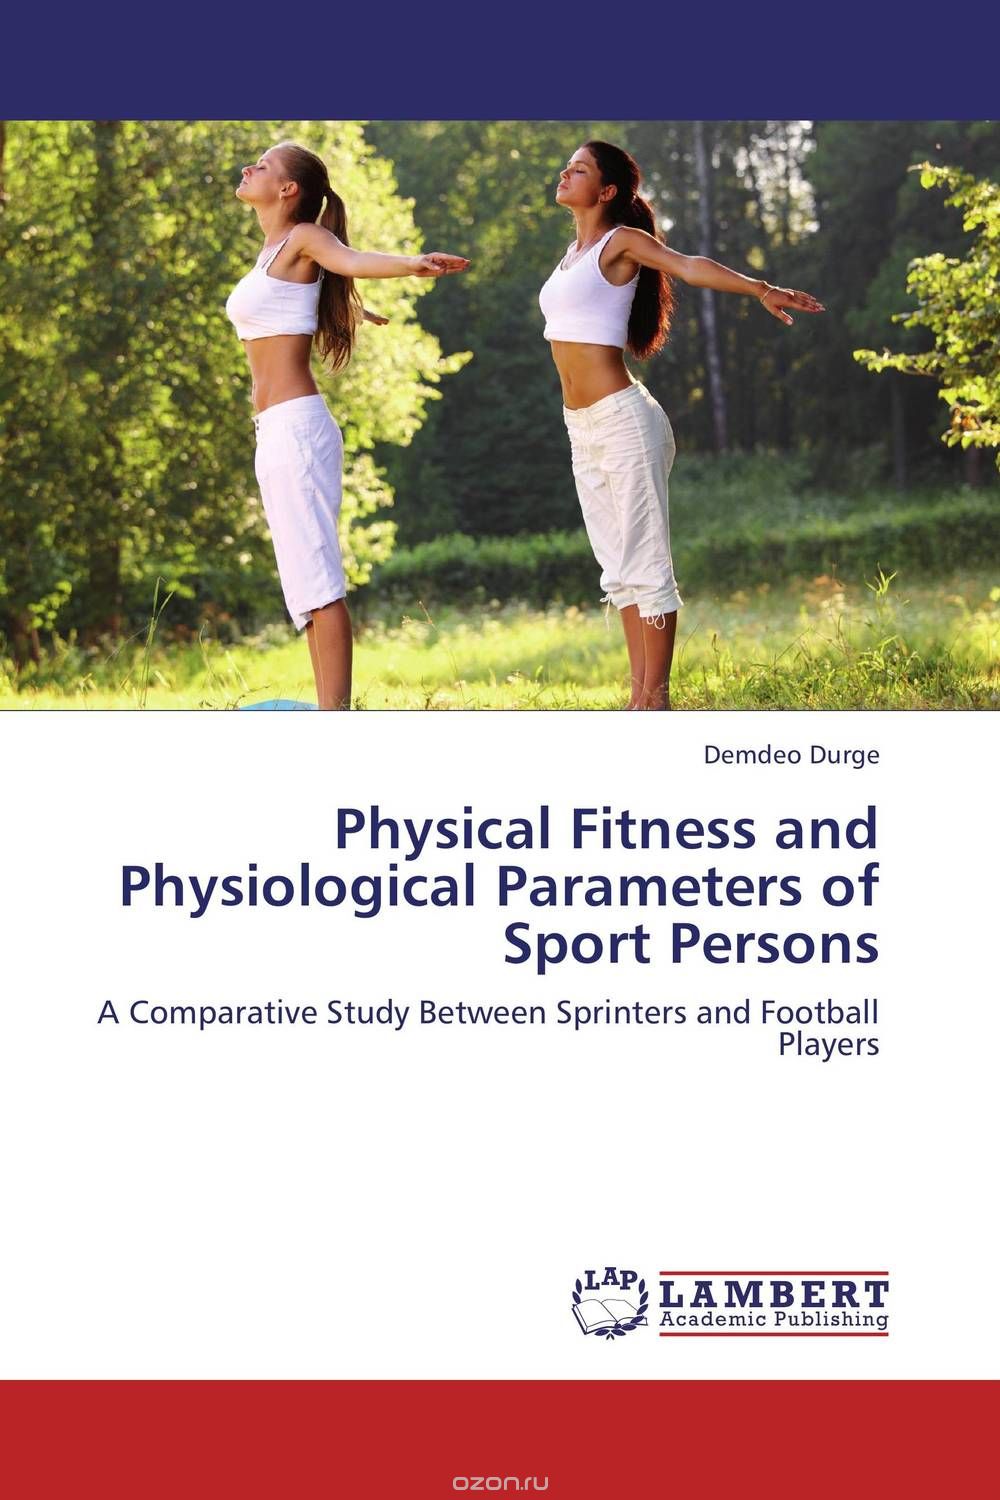 Скачать книгу "Physical Fitness and Physiological Parameters of Sport Persons"